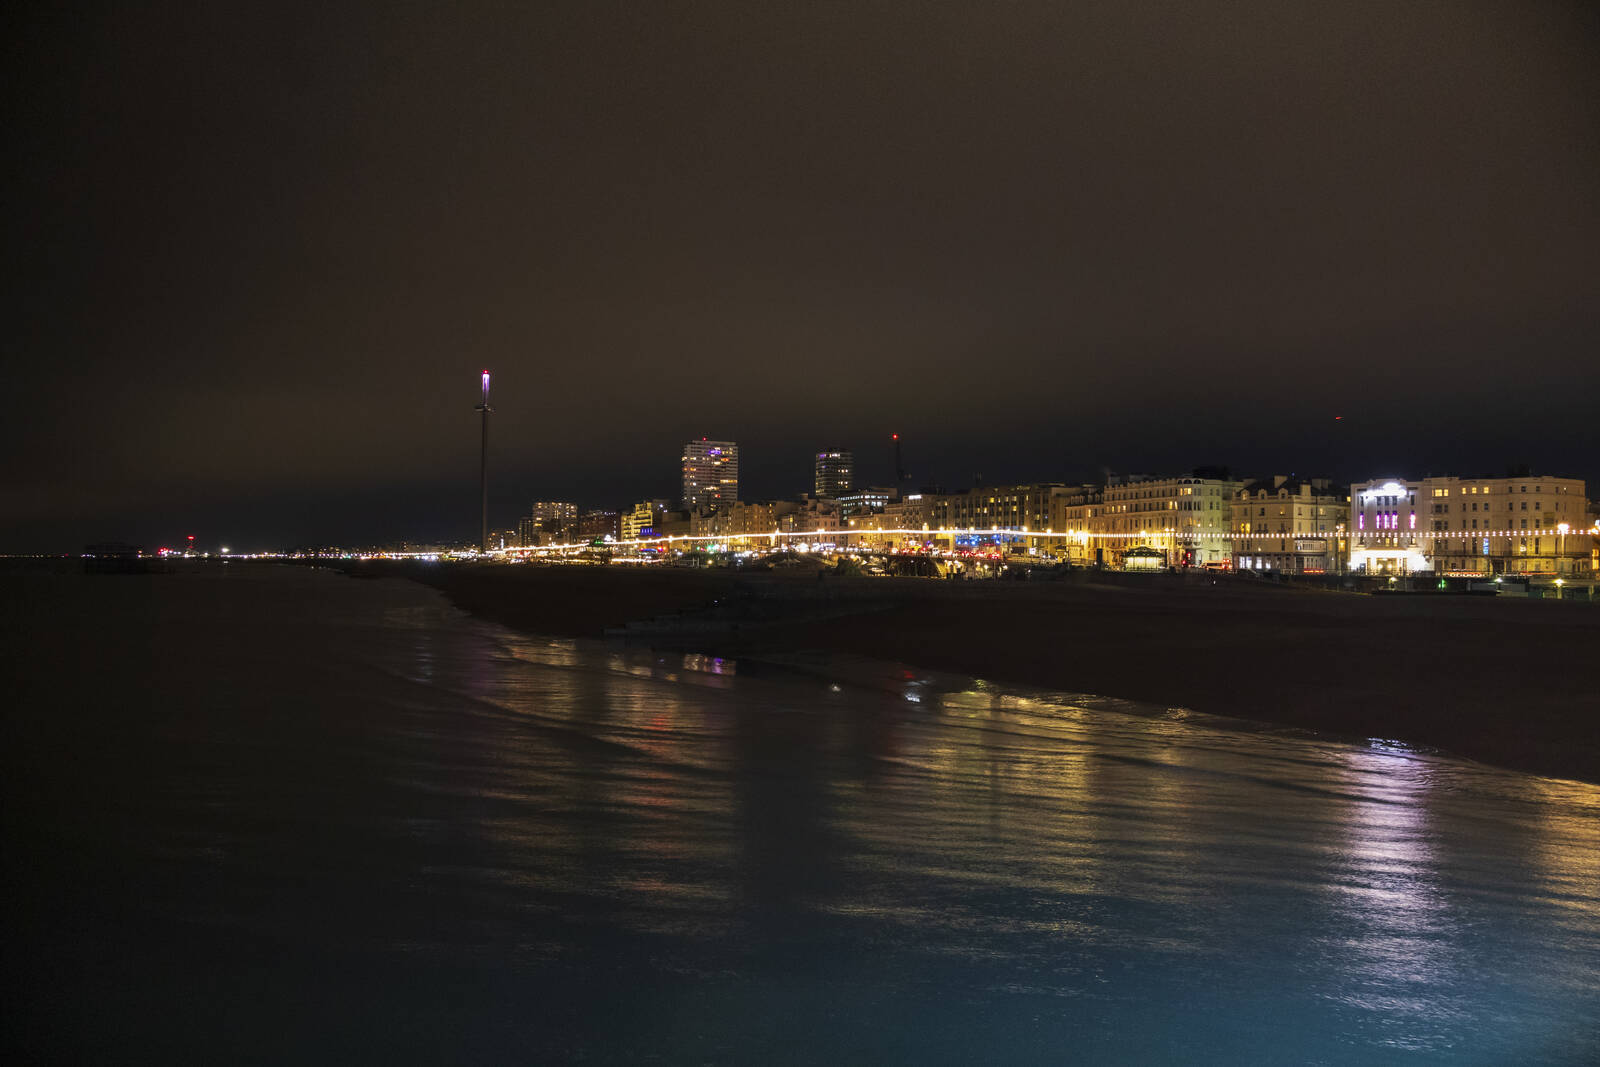 Image of Palace Pier by Richard Joiner